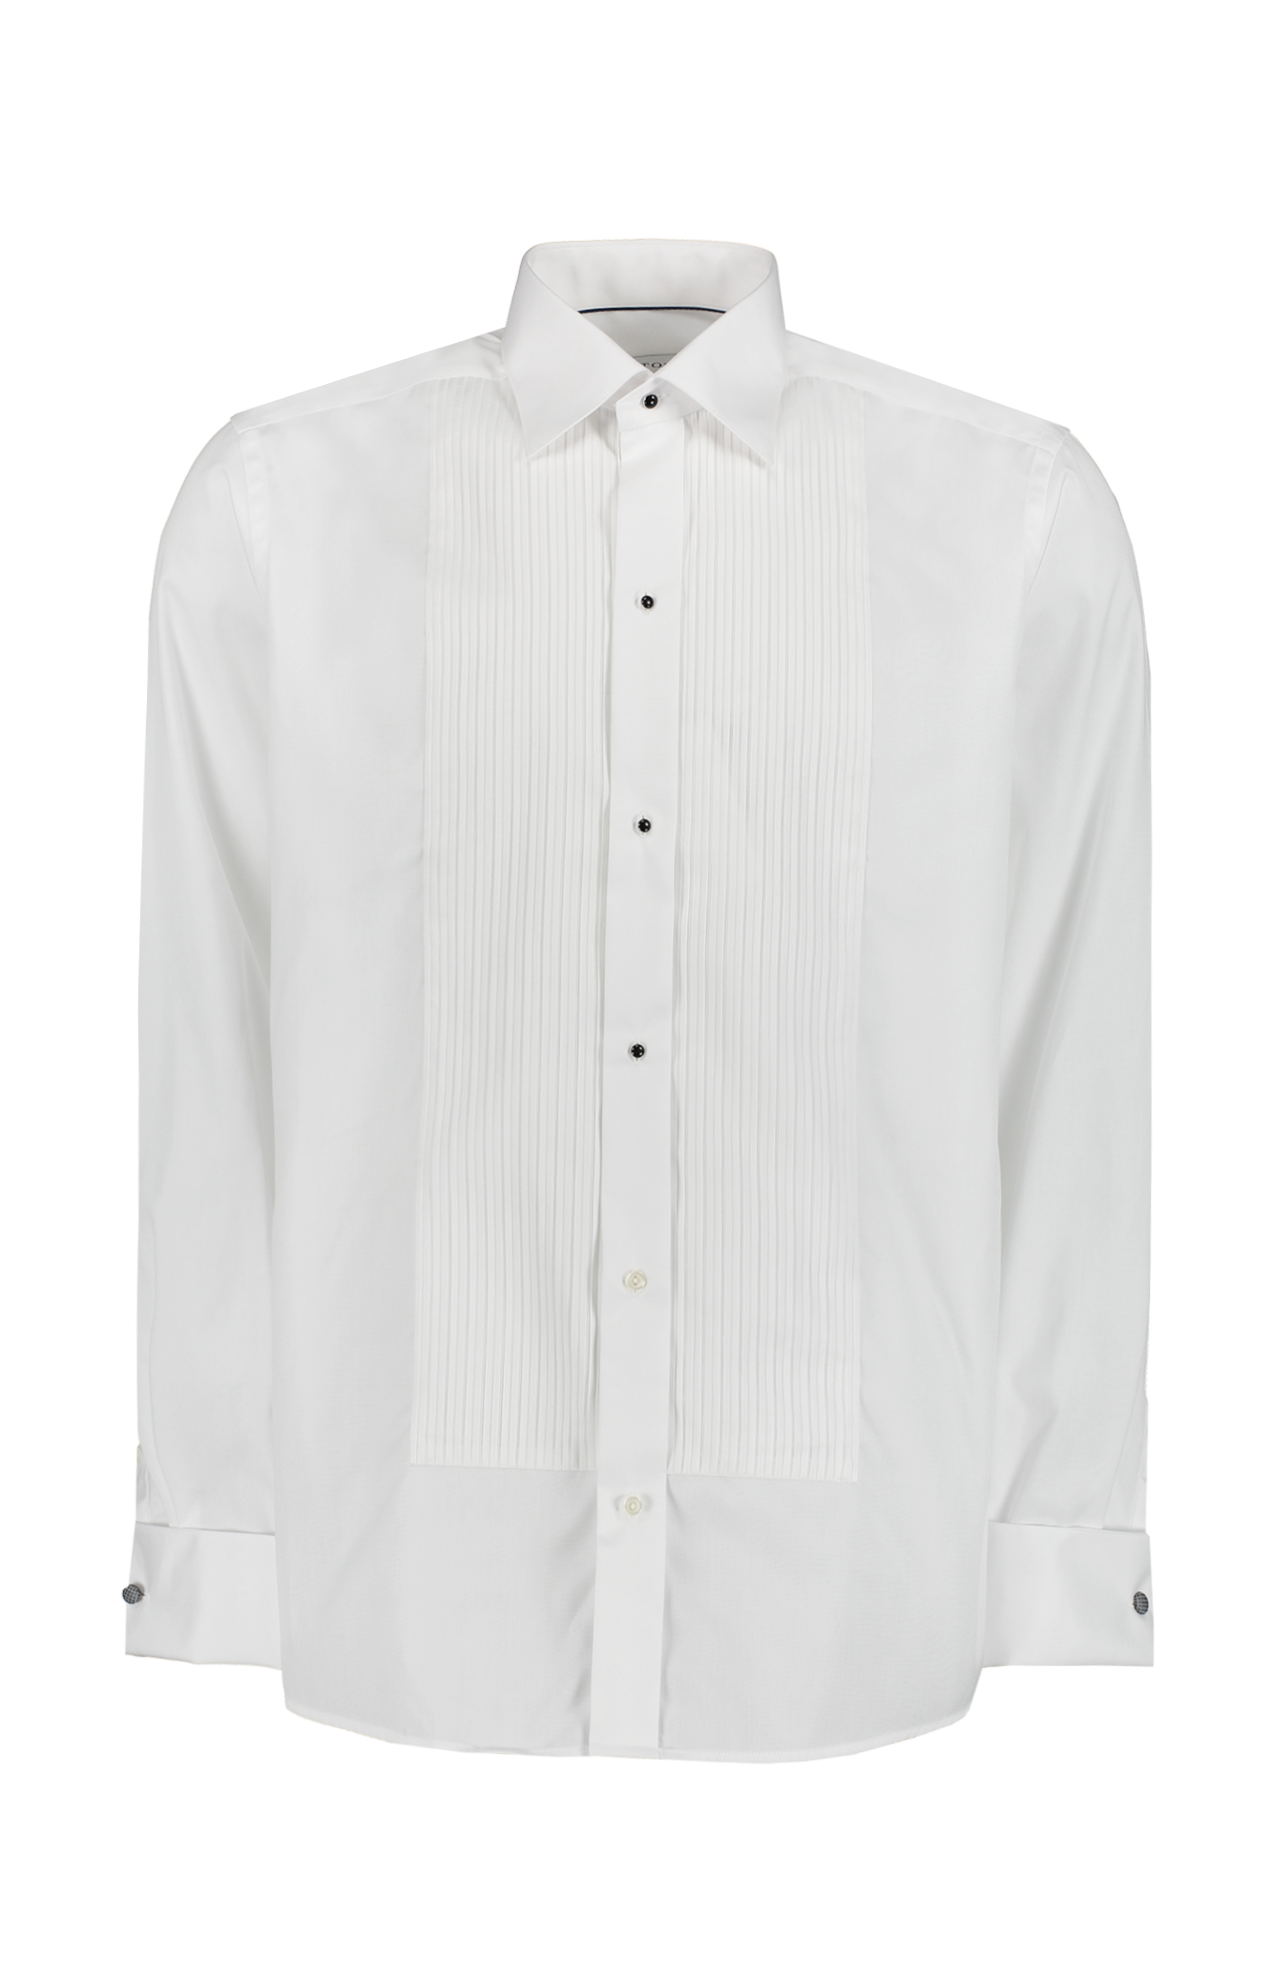 Eton Bibbed Tuxedo Shirt in White with Contrast Buttons - Mannequin Image (4441564741747)